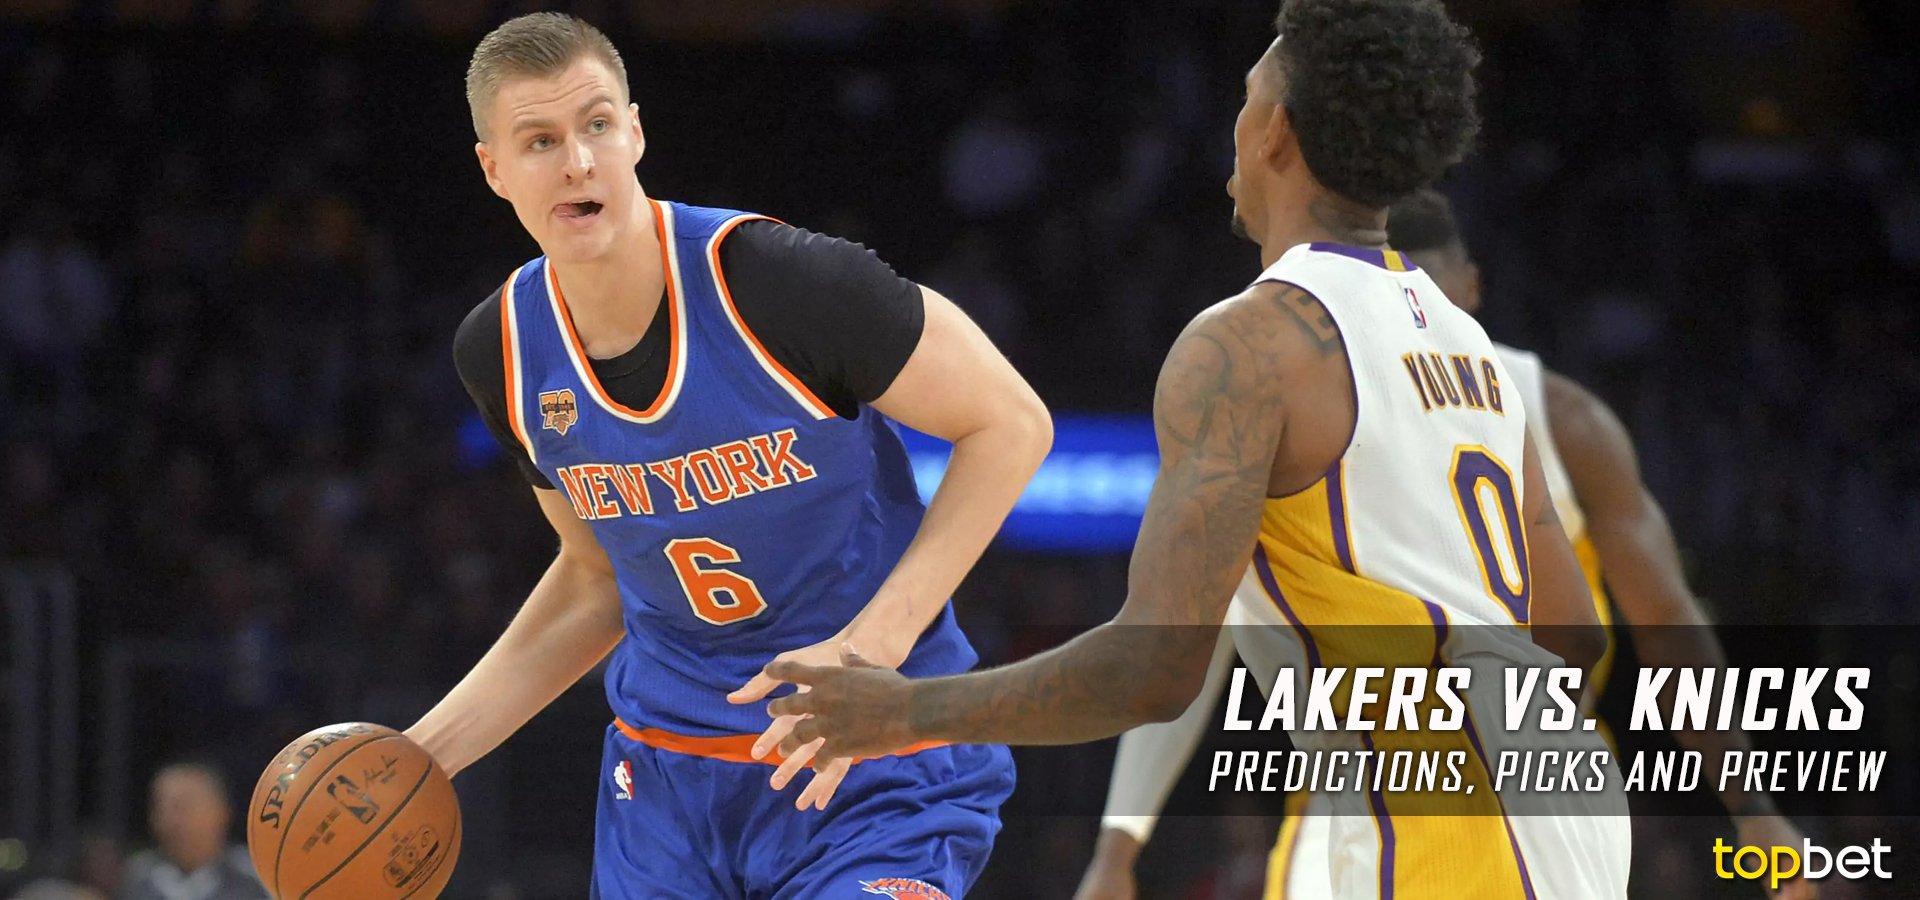 Lakers vs Knicks Predictions, Odds & Preview – February 2017